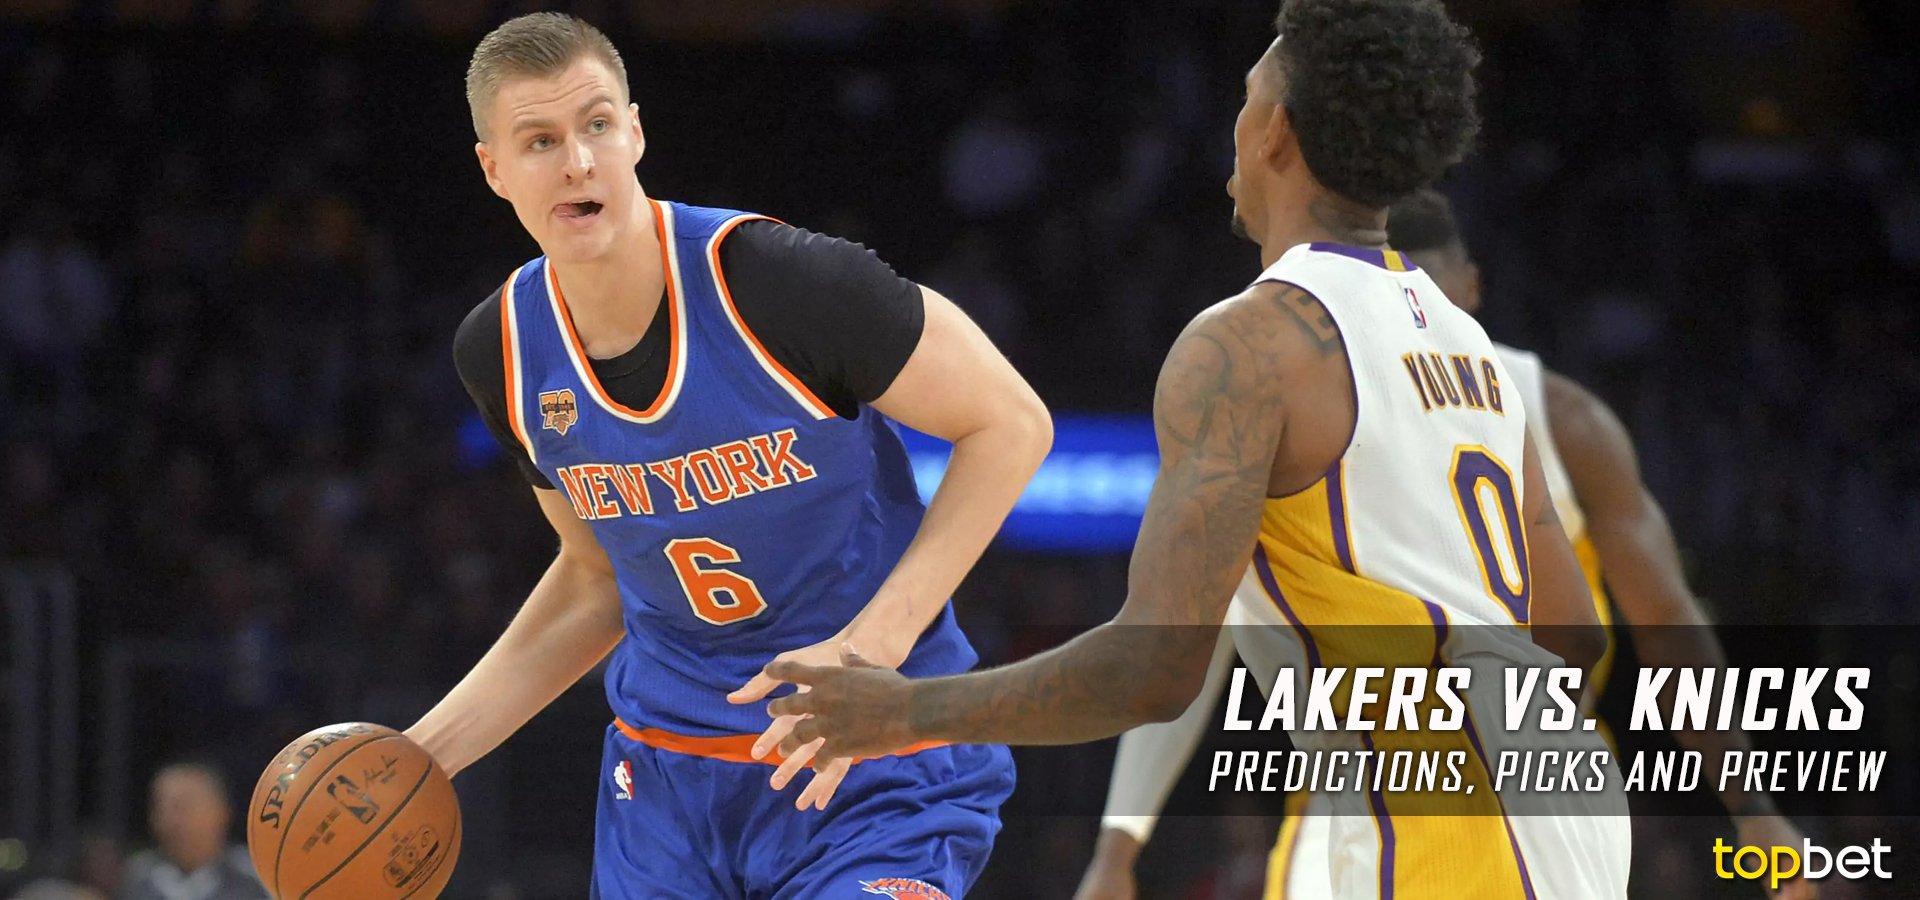 Lakers vs Knicks Predictions, Odds & Preview – February 2017